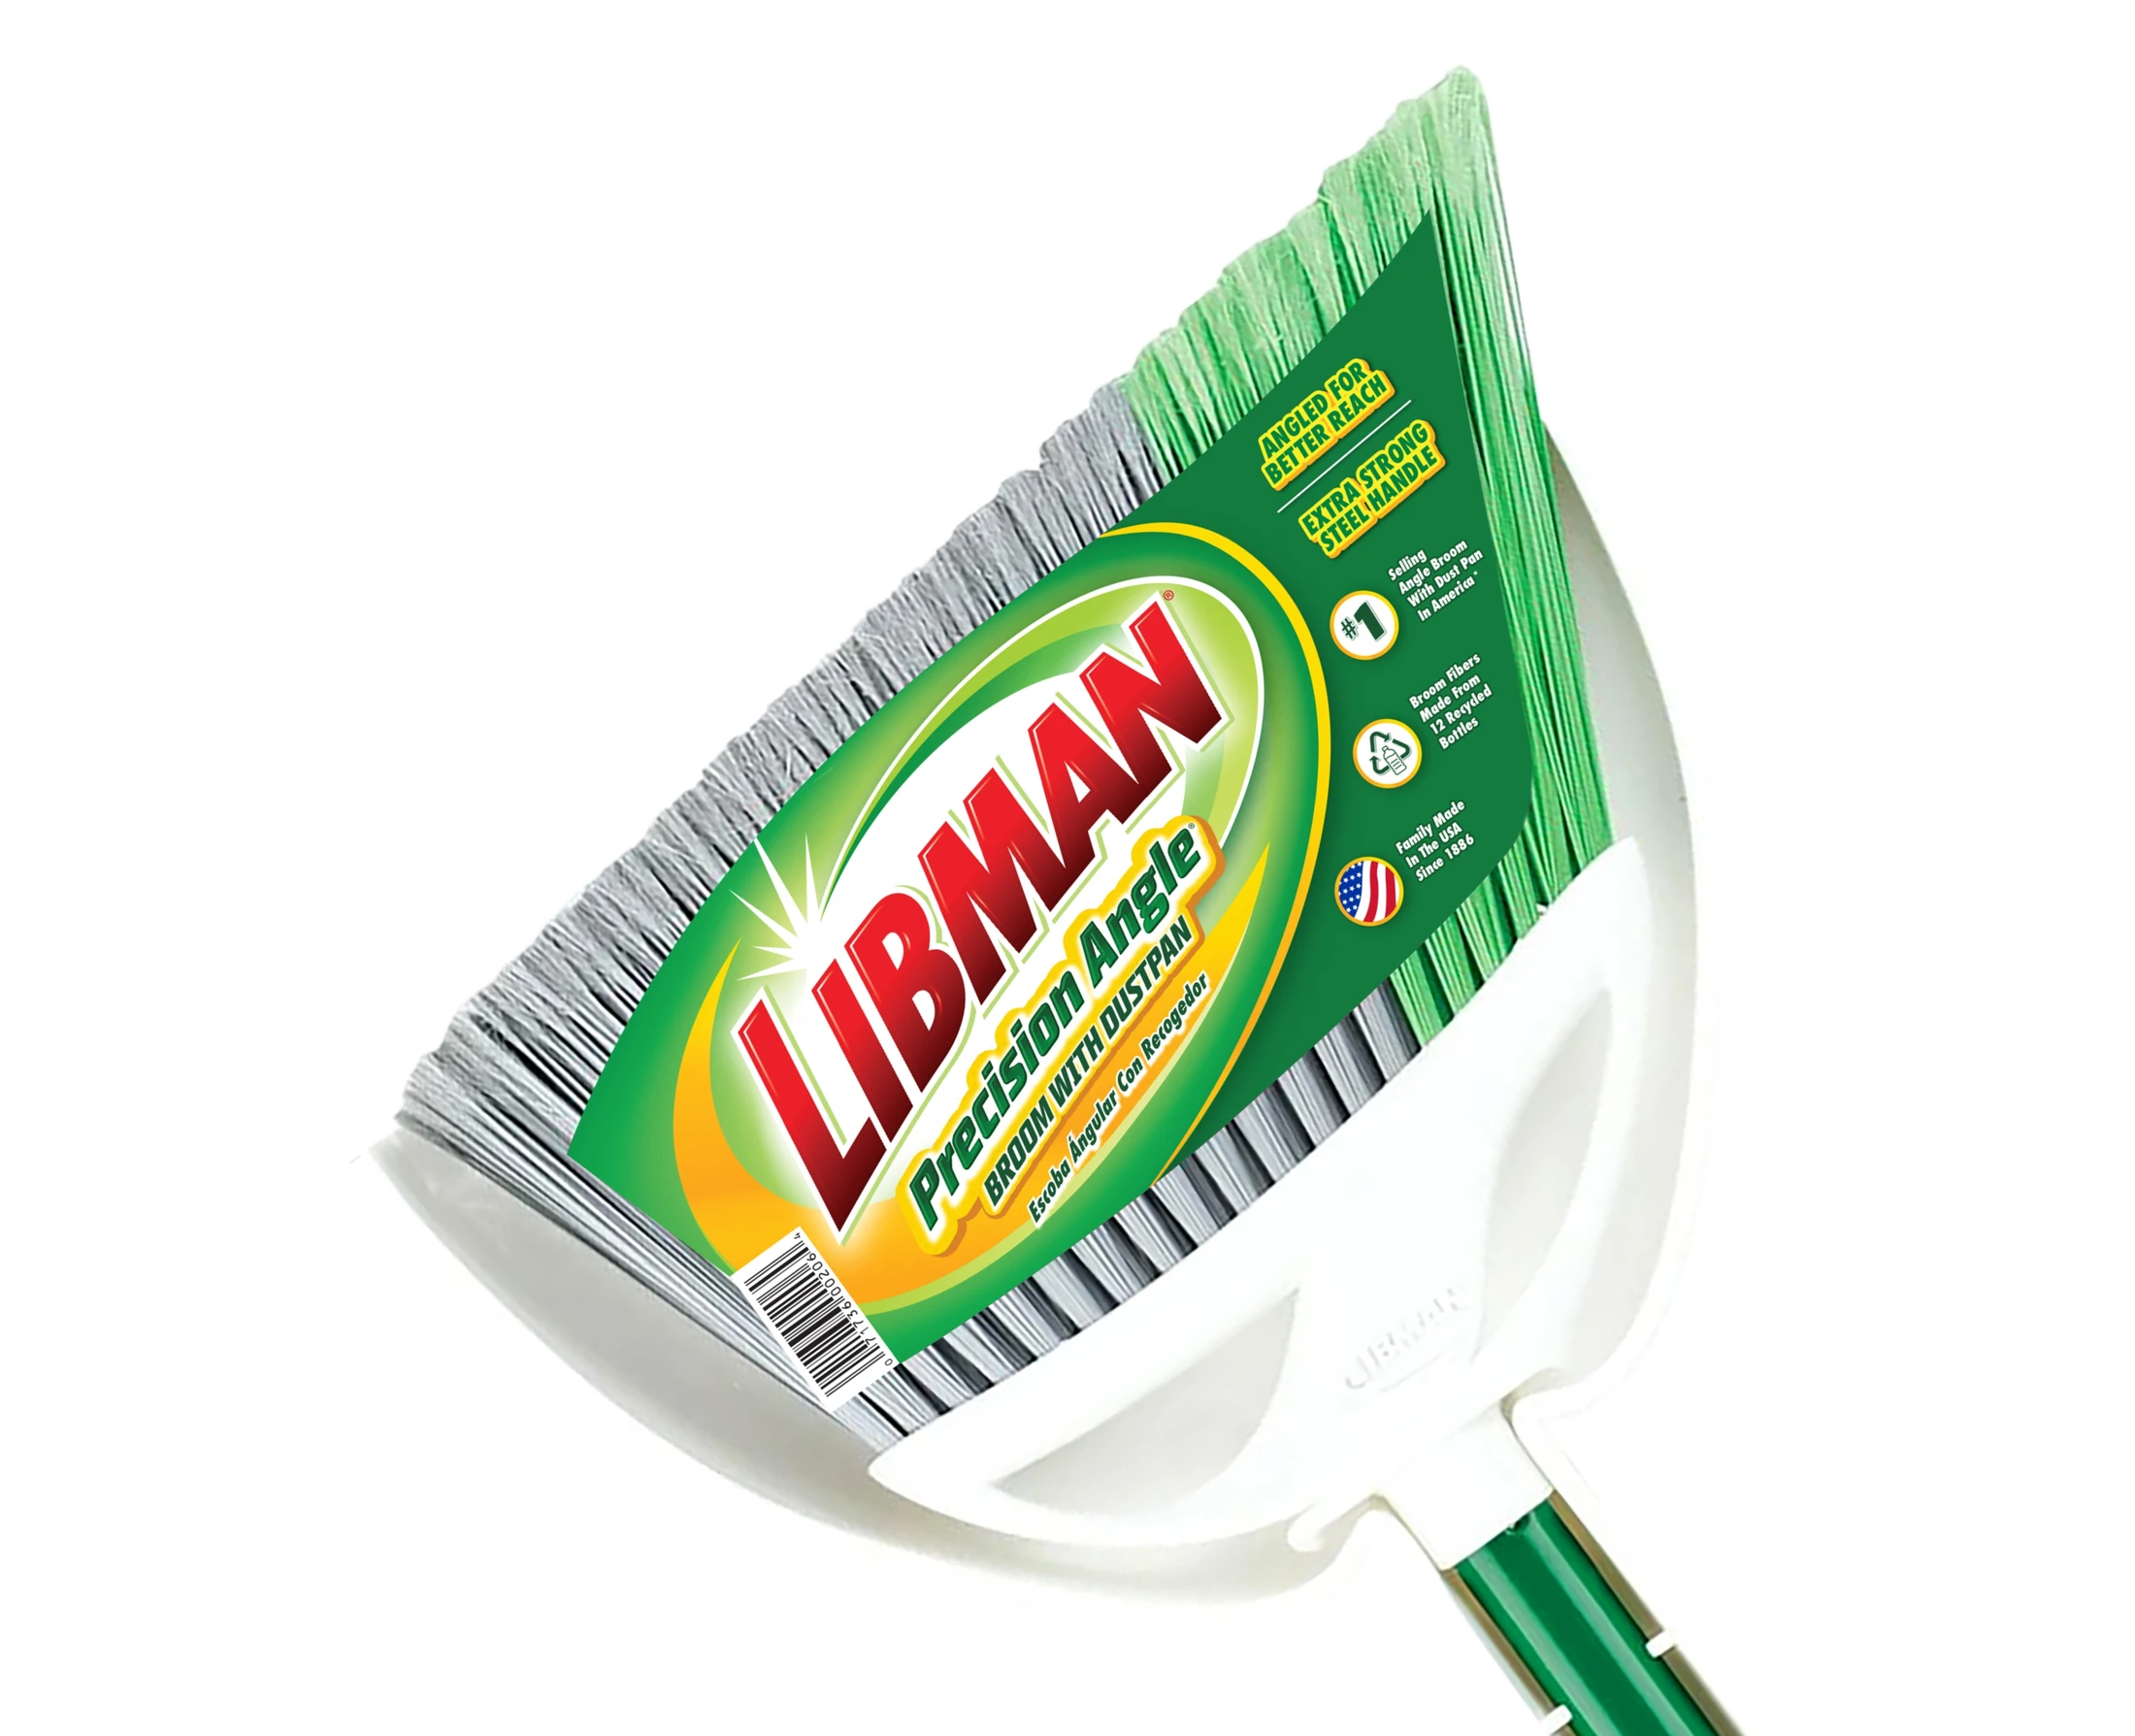 A green and white broom with a handle.